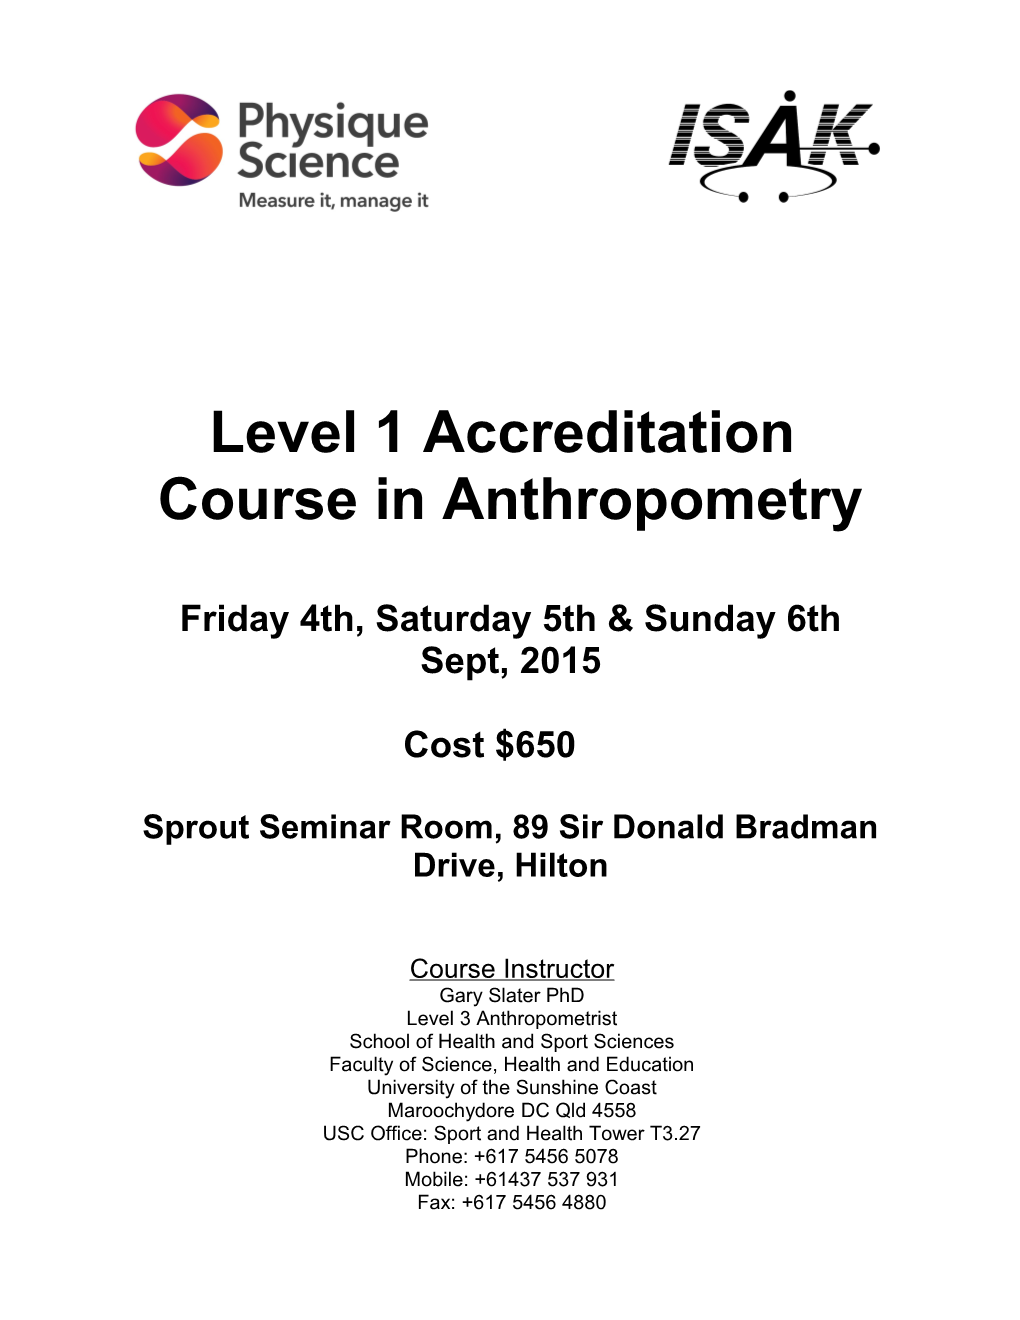 Level 1 & 2 Accreditation Course in Anthropometry